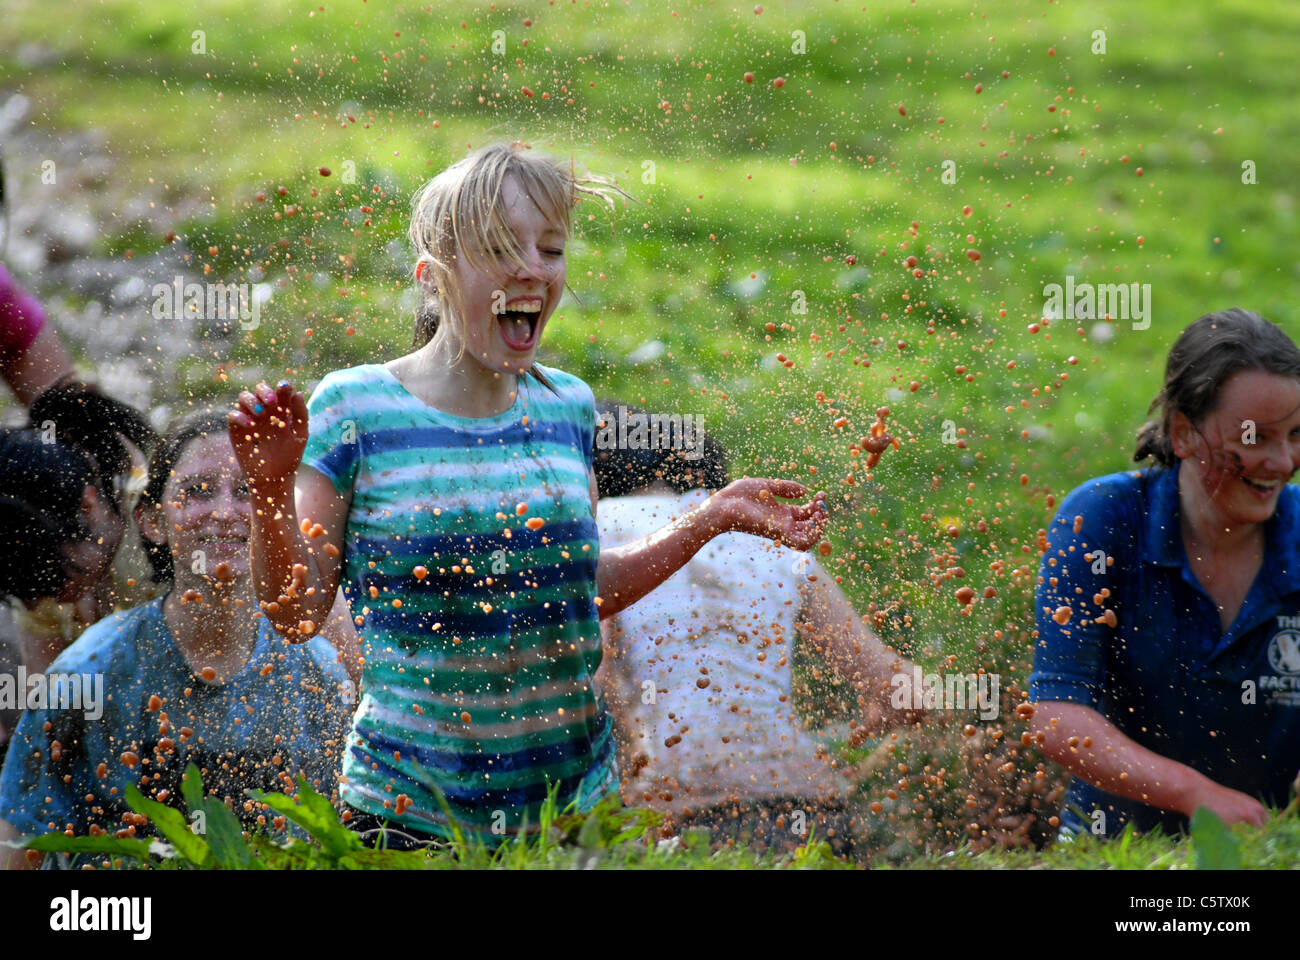 Getting splashed with water. Stock Photo